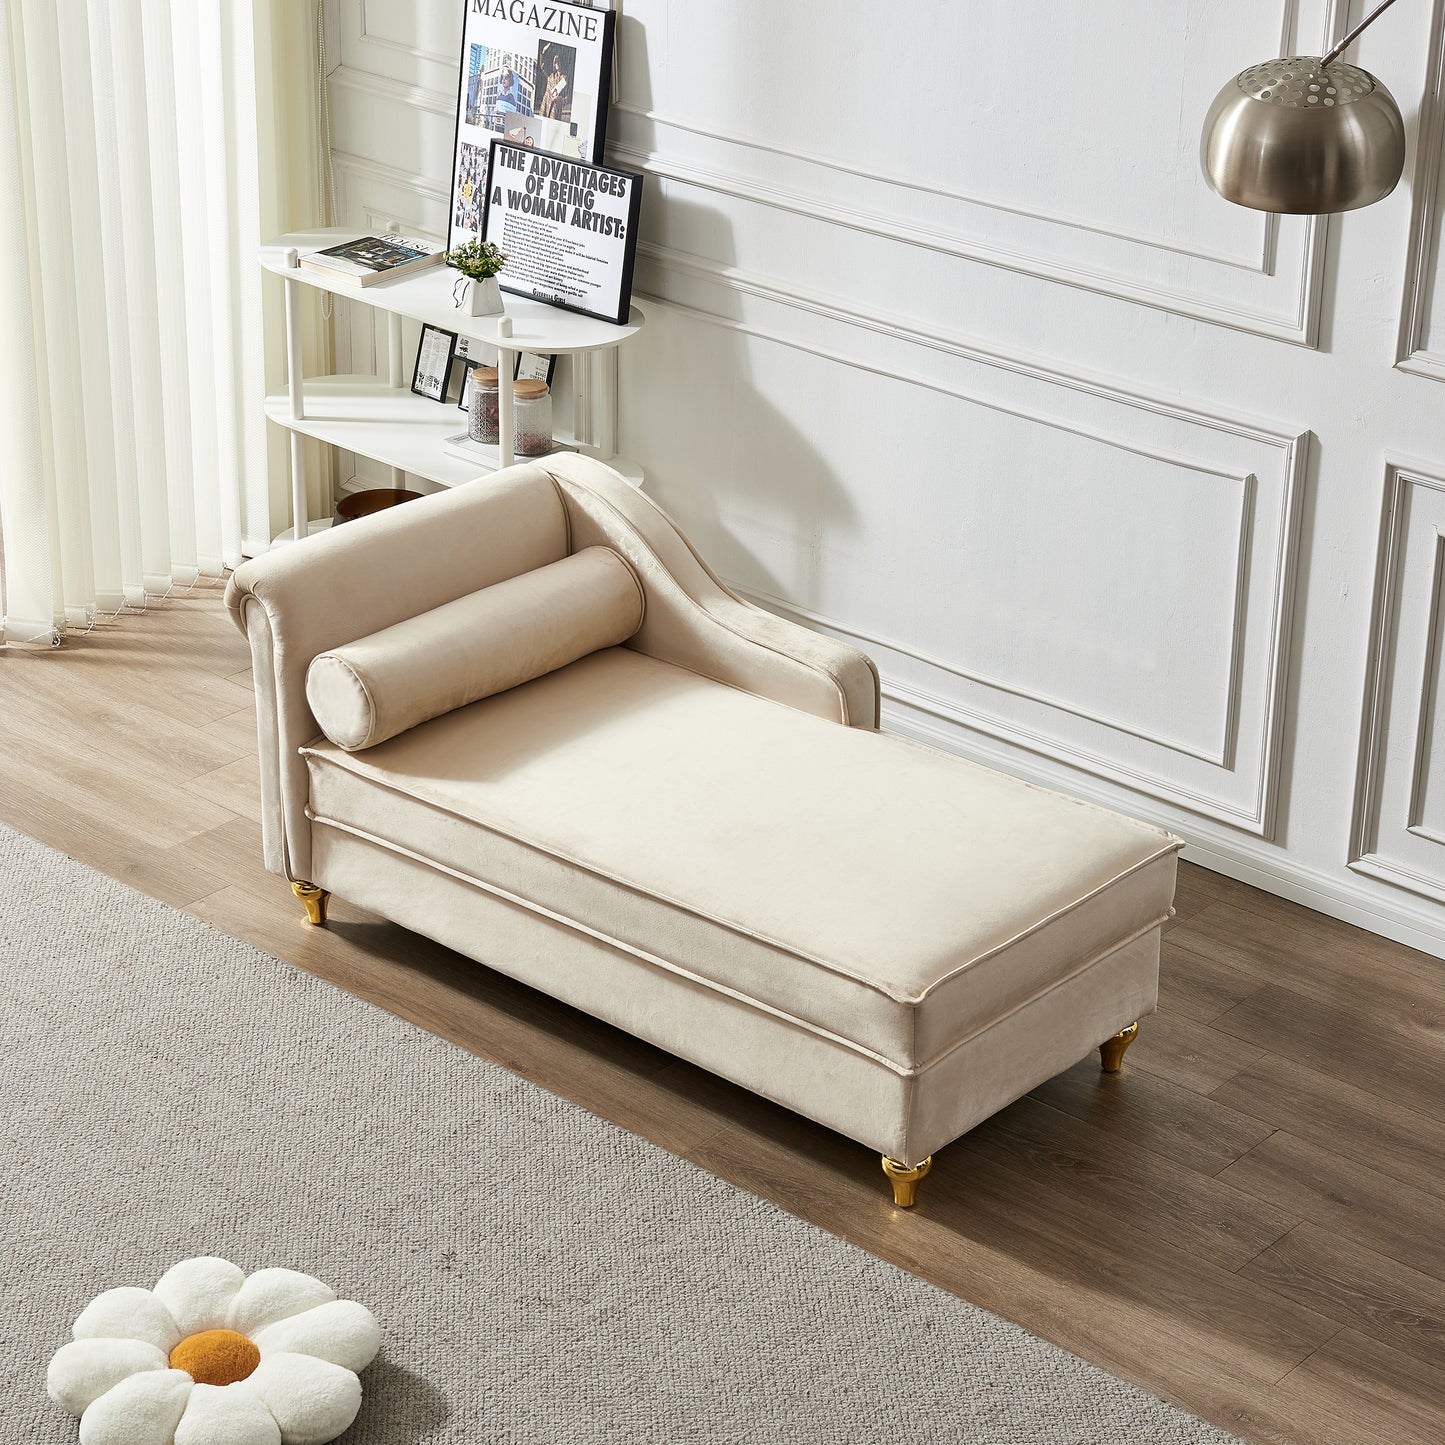 Modern Upholstery Chaise Lounge Chair with Storage Velvet (Beige)